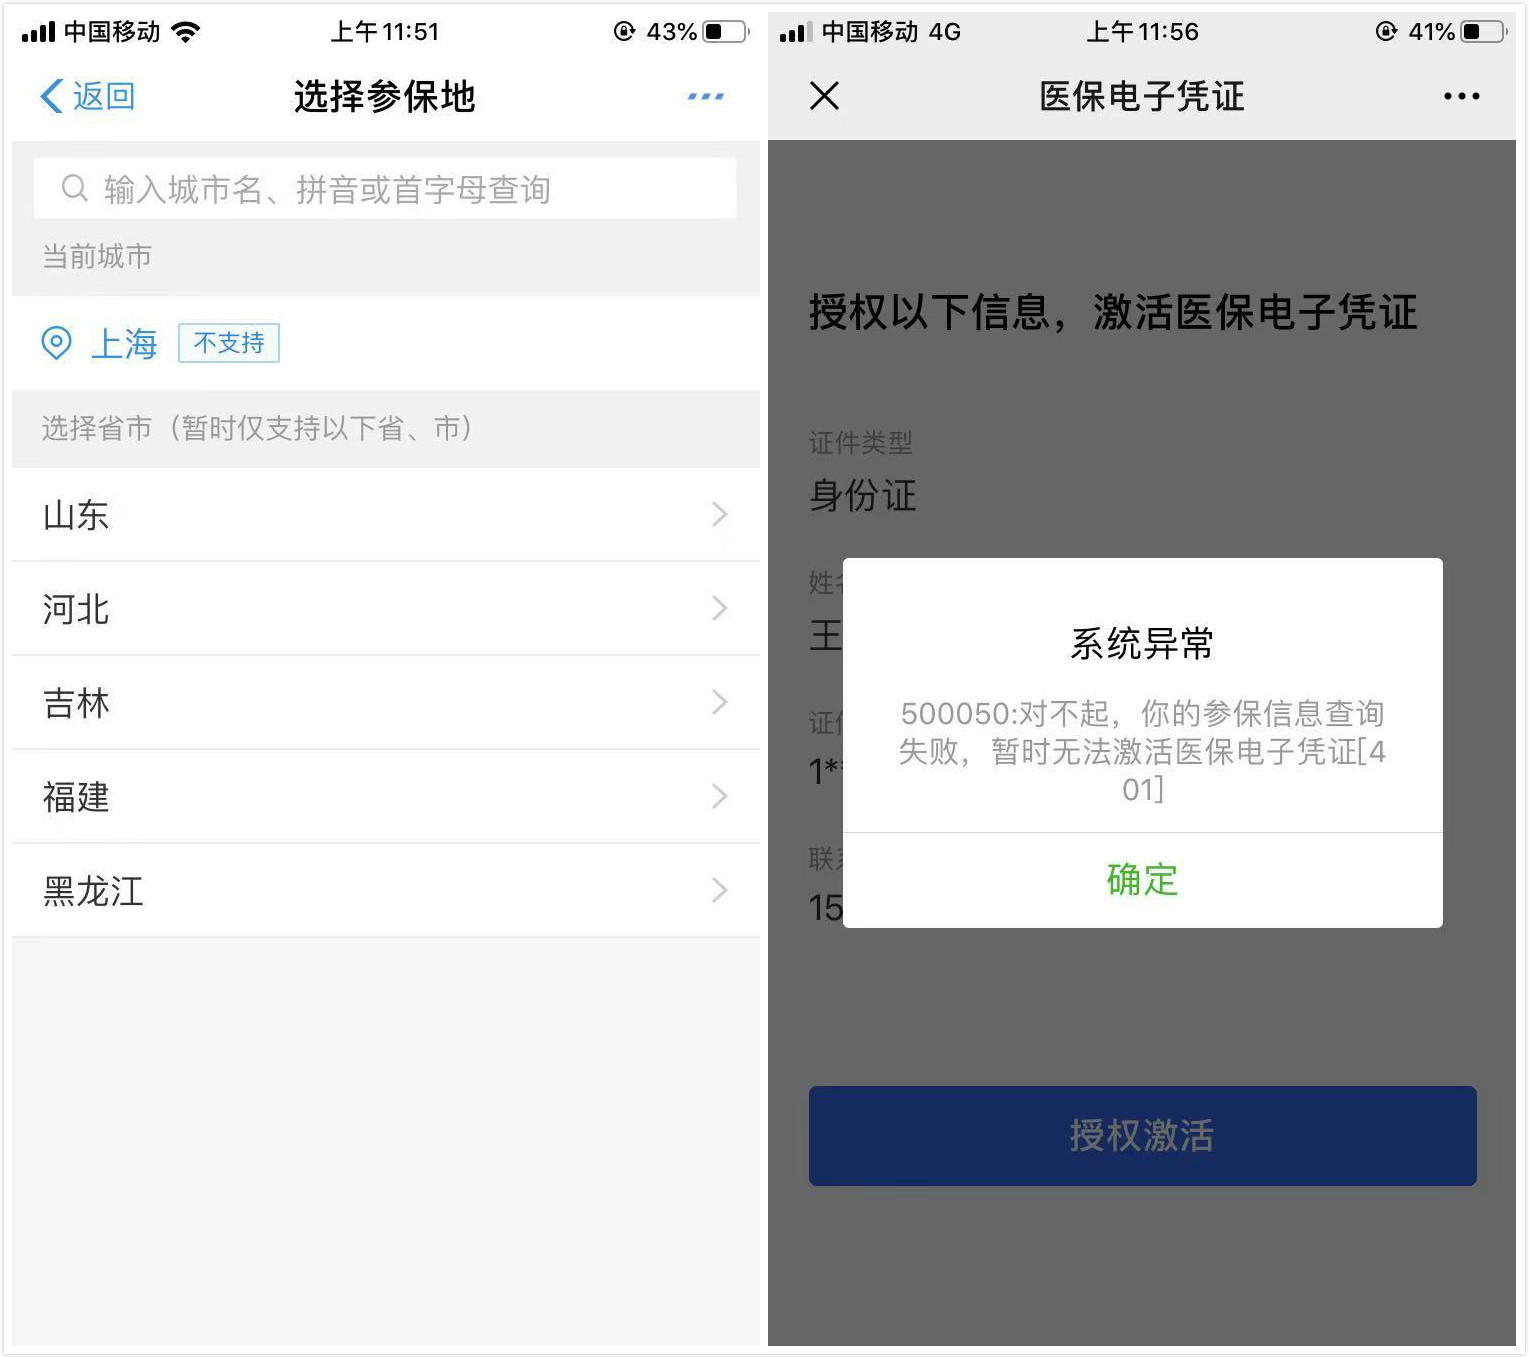 The front line | Medical insurance electronic voucher on the WeChat Alipay, see a doctor without a card